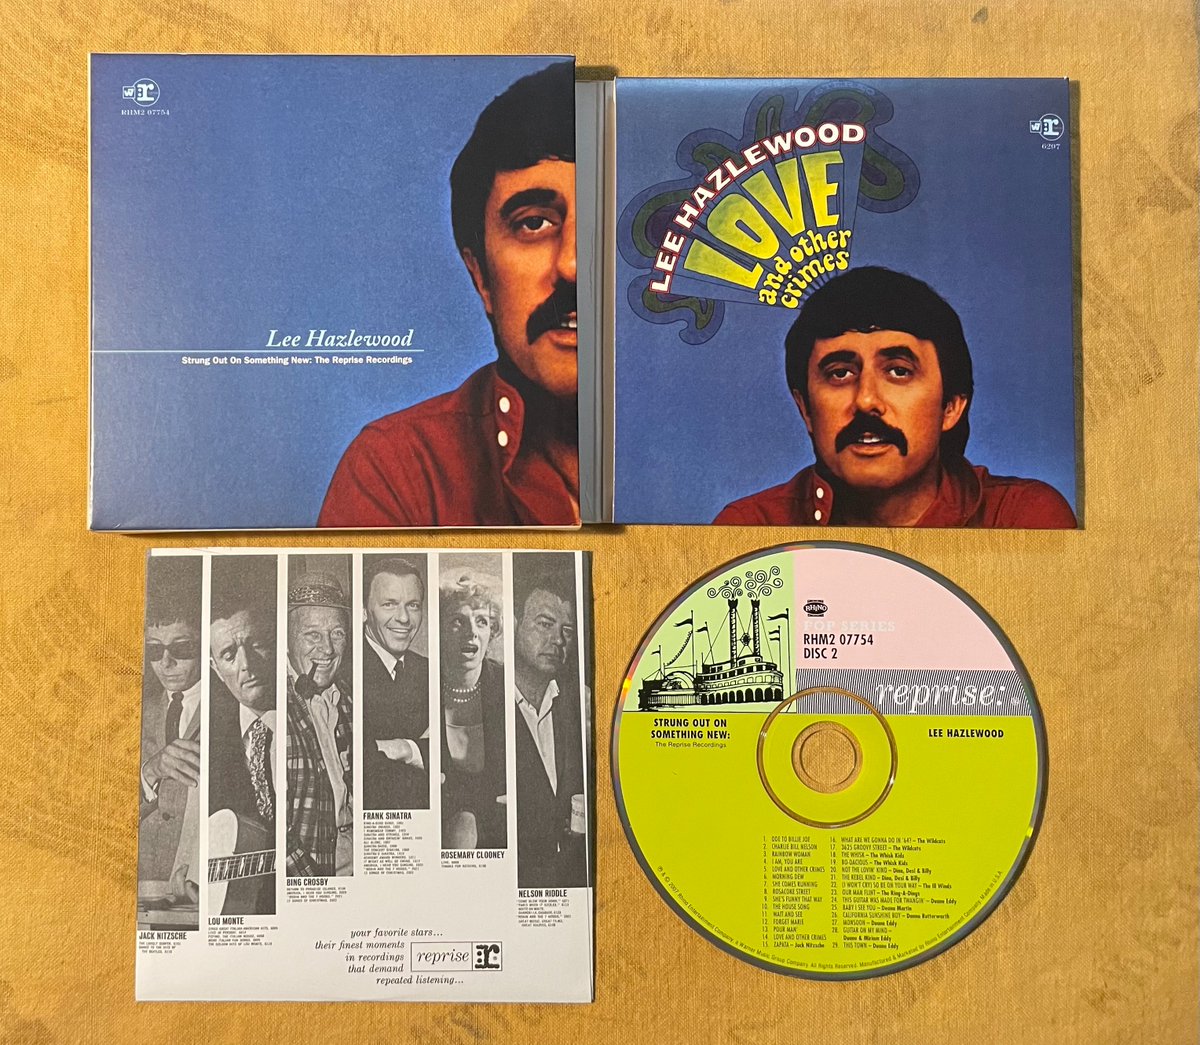 LEE HAZLEWOOD • LOVE AND OTHER CRIMES (Reprise, 1968) Jazzy #chamberpop recorded in Paris w/ Hal Blaine drums, Don Randi piano, James Burton electric guitar. 2CD STRUNG OUT ON SOMETHING NEW (2007) adds solo singles & other Lee productions ('64-68) #RockSolidAlbumADay2023 312/365